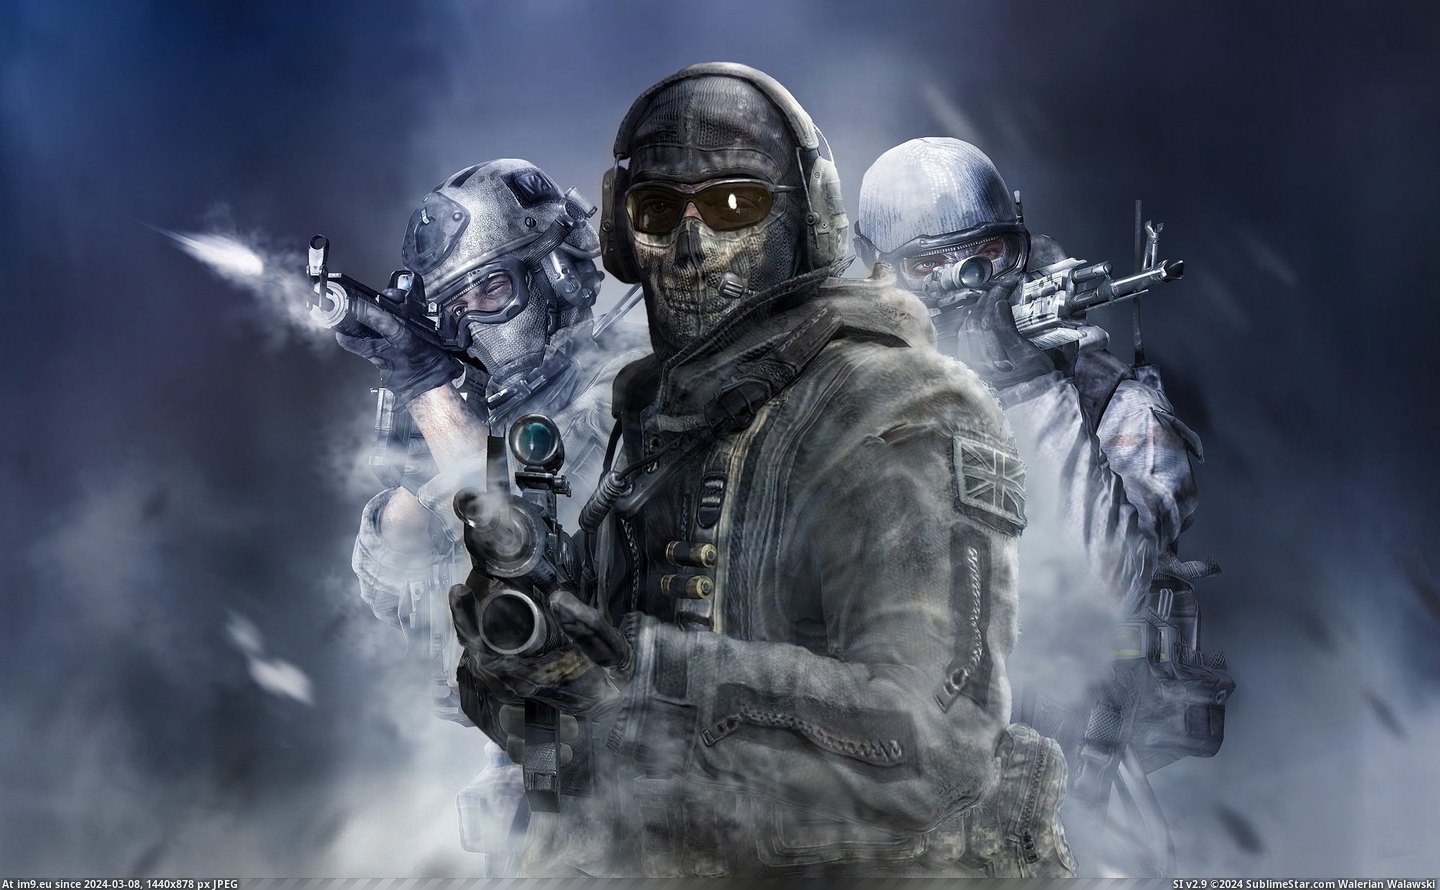 #Game #Duty #Call #Video Video Game Call Of Duty 102917 Pic. (Obraz z album Games Wallpapers))